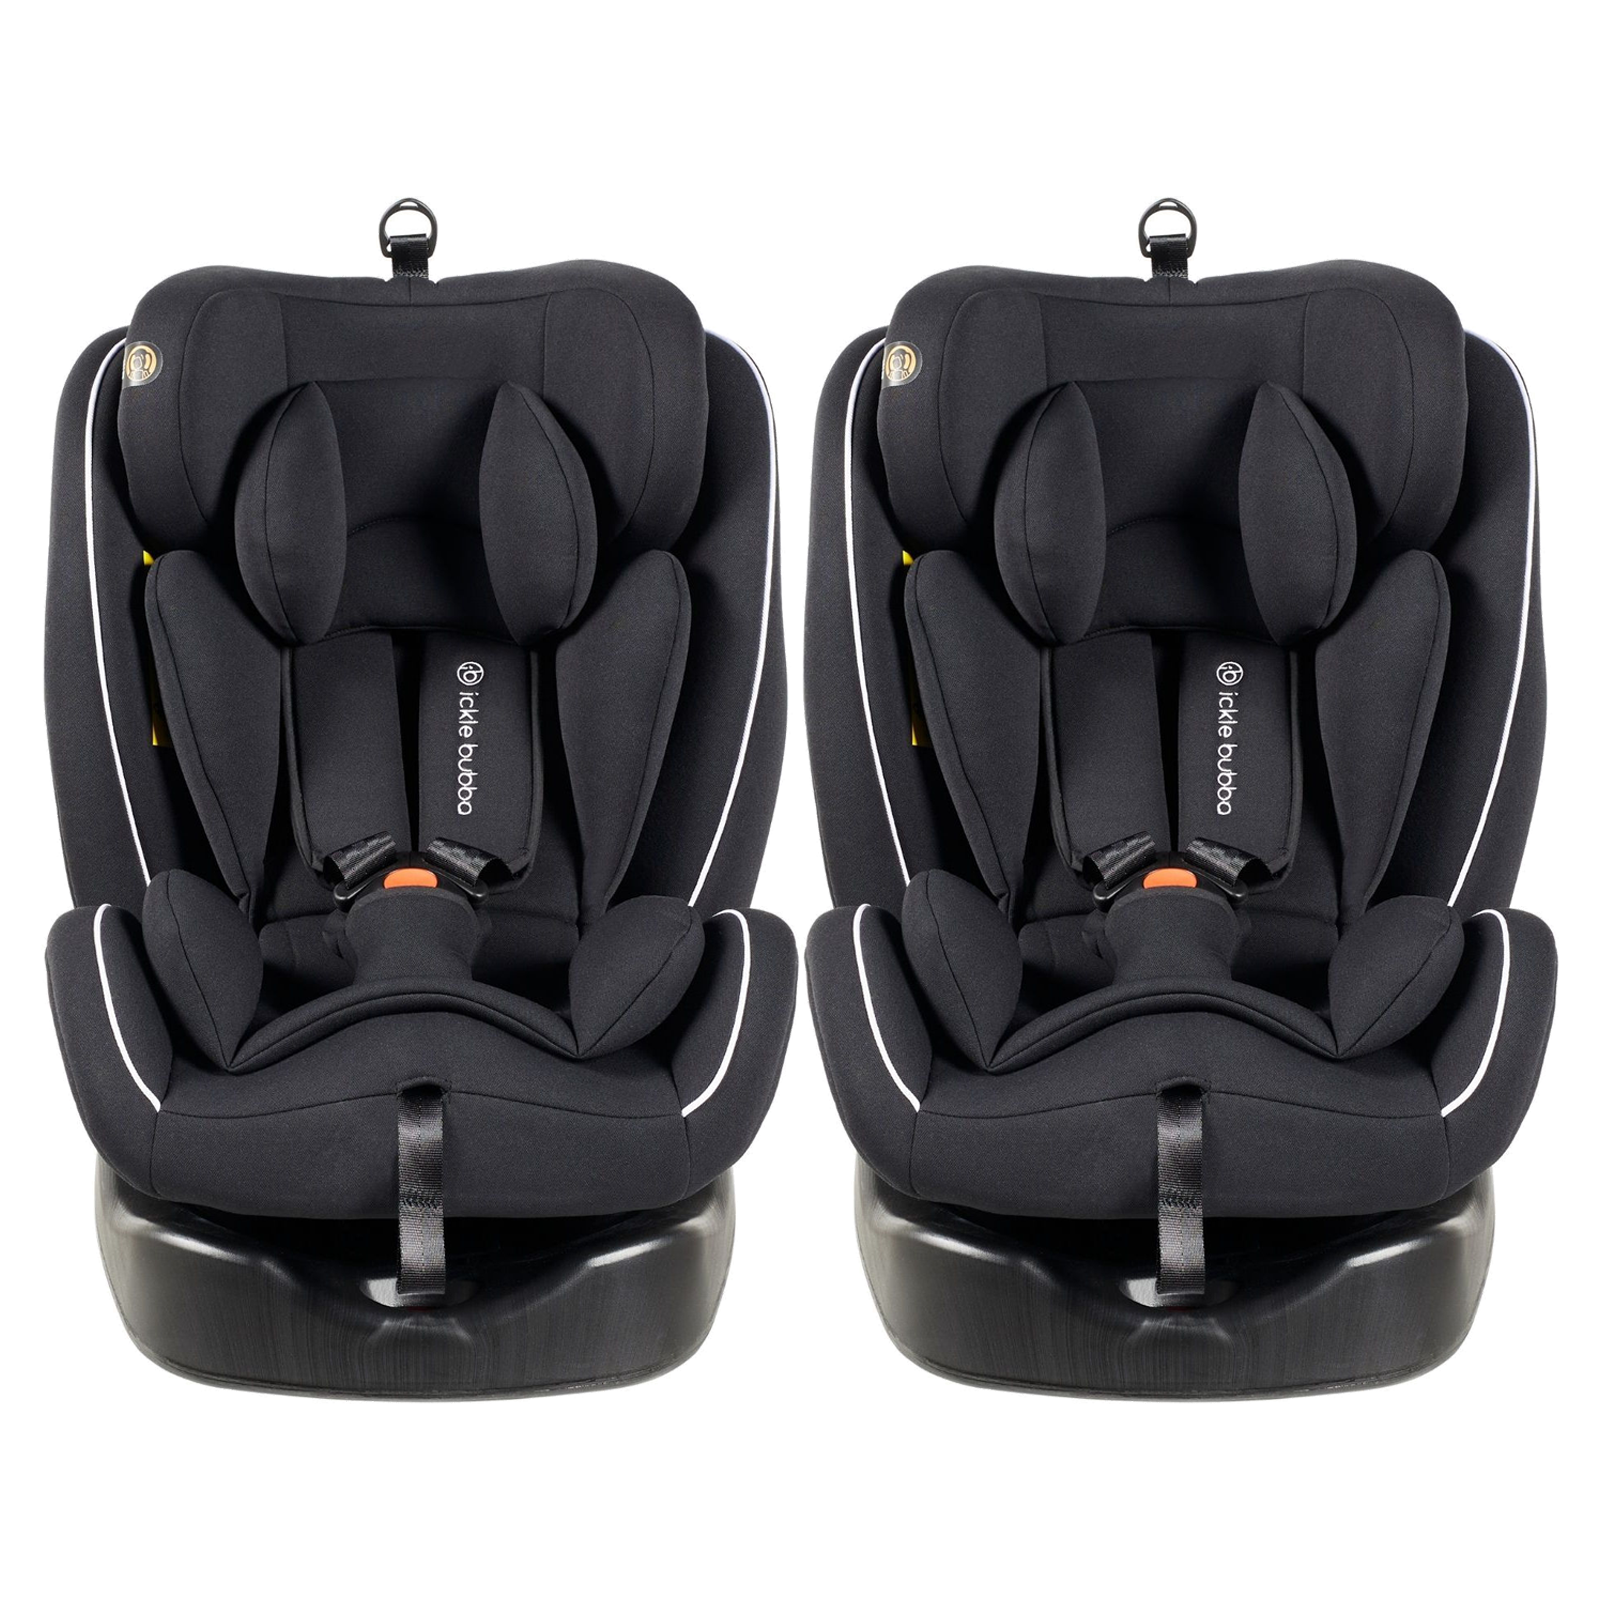 Ickle Bubba Rotator 360 Spin Group 0+/1/2/3 Car Seat - Black (2 Pack)